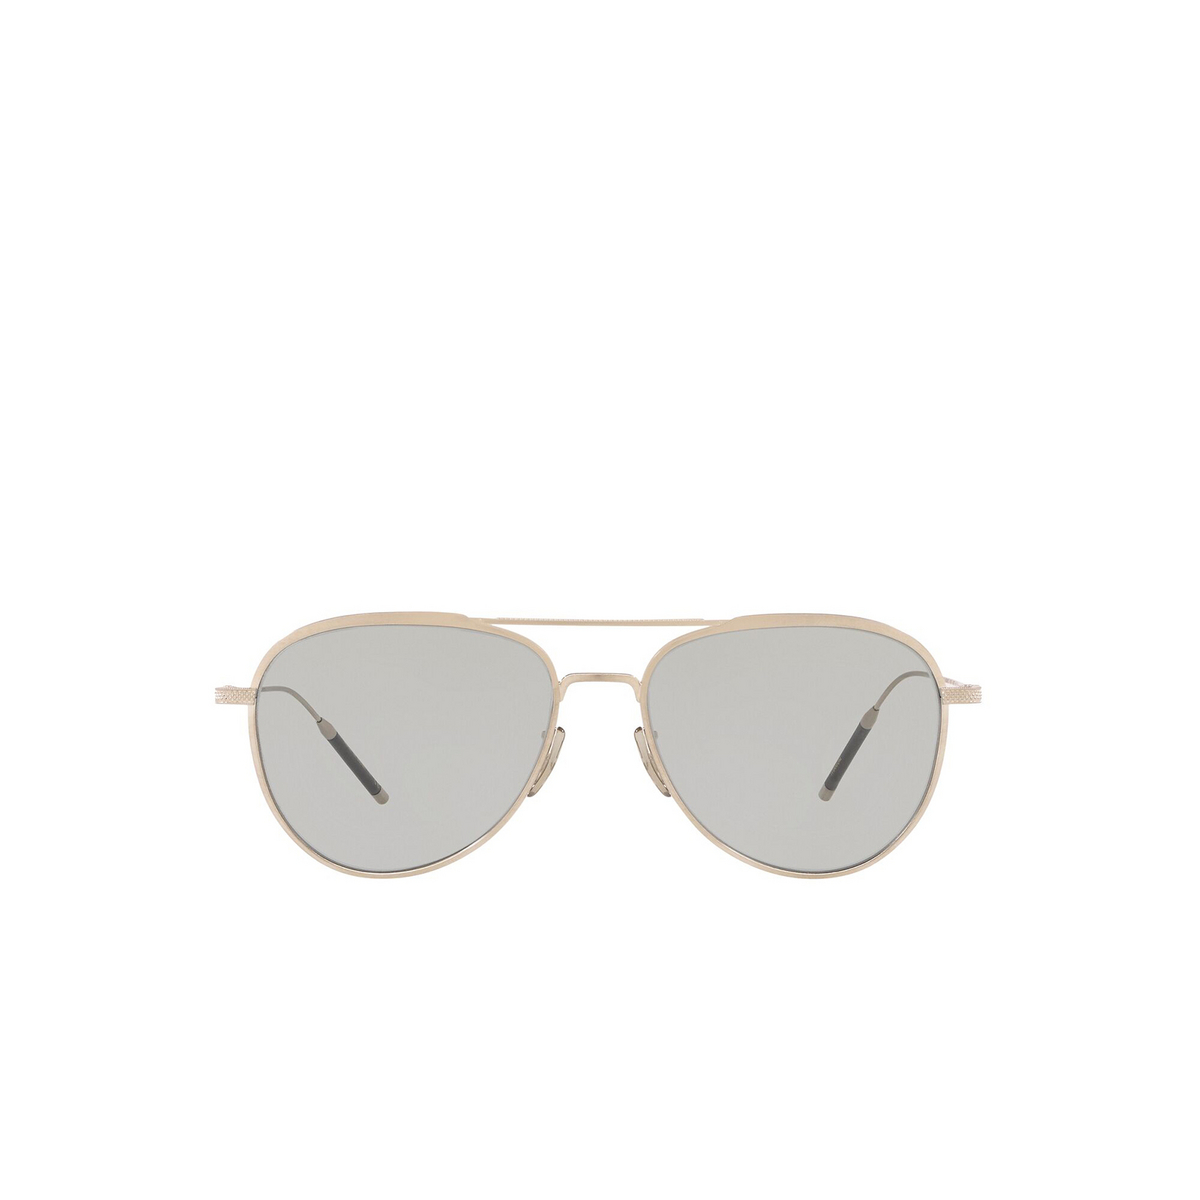 Oliver Peoples® Aviator Sunglasses: Tk-3 OV1276ST color Brushed Silver 5254R5 - front view.